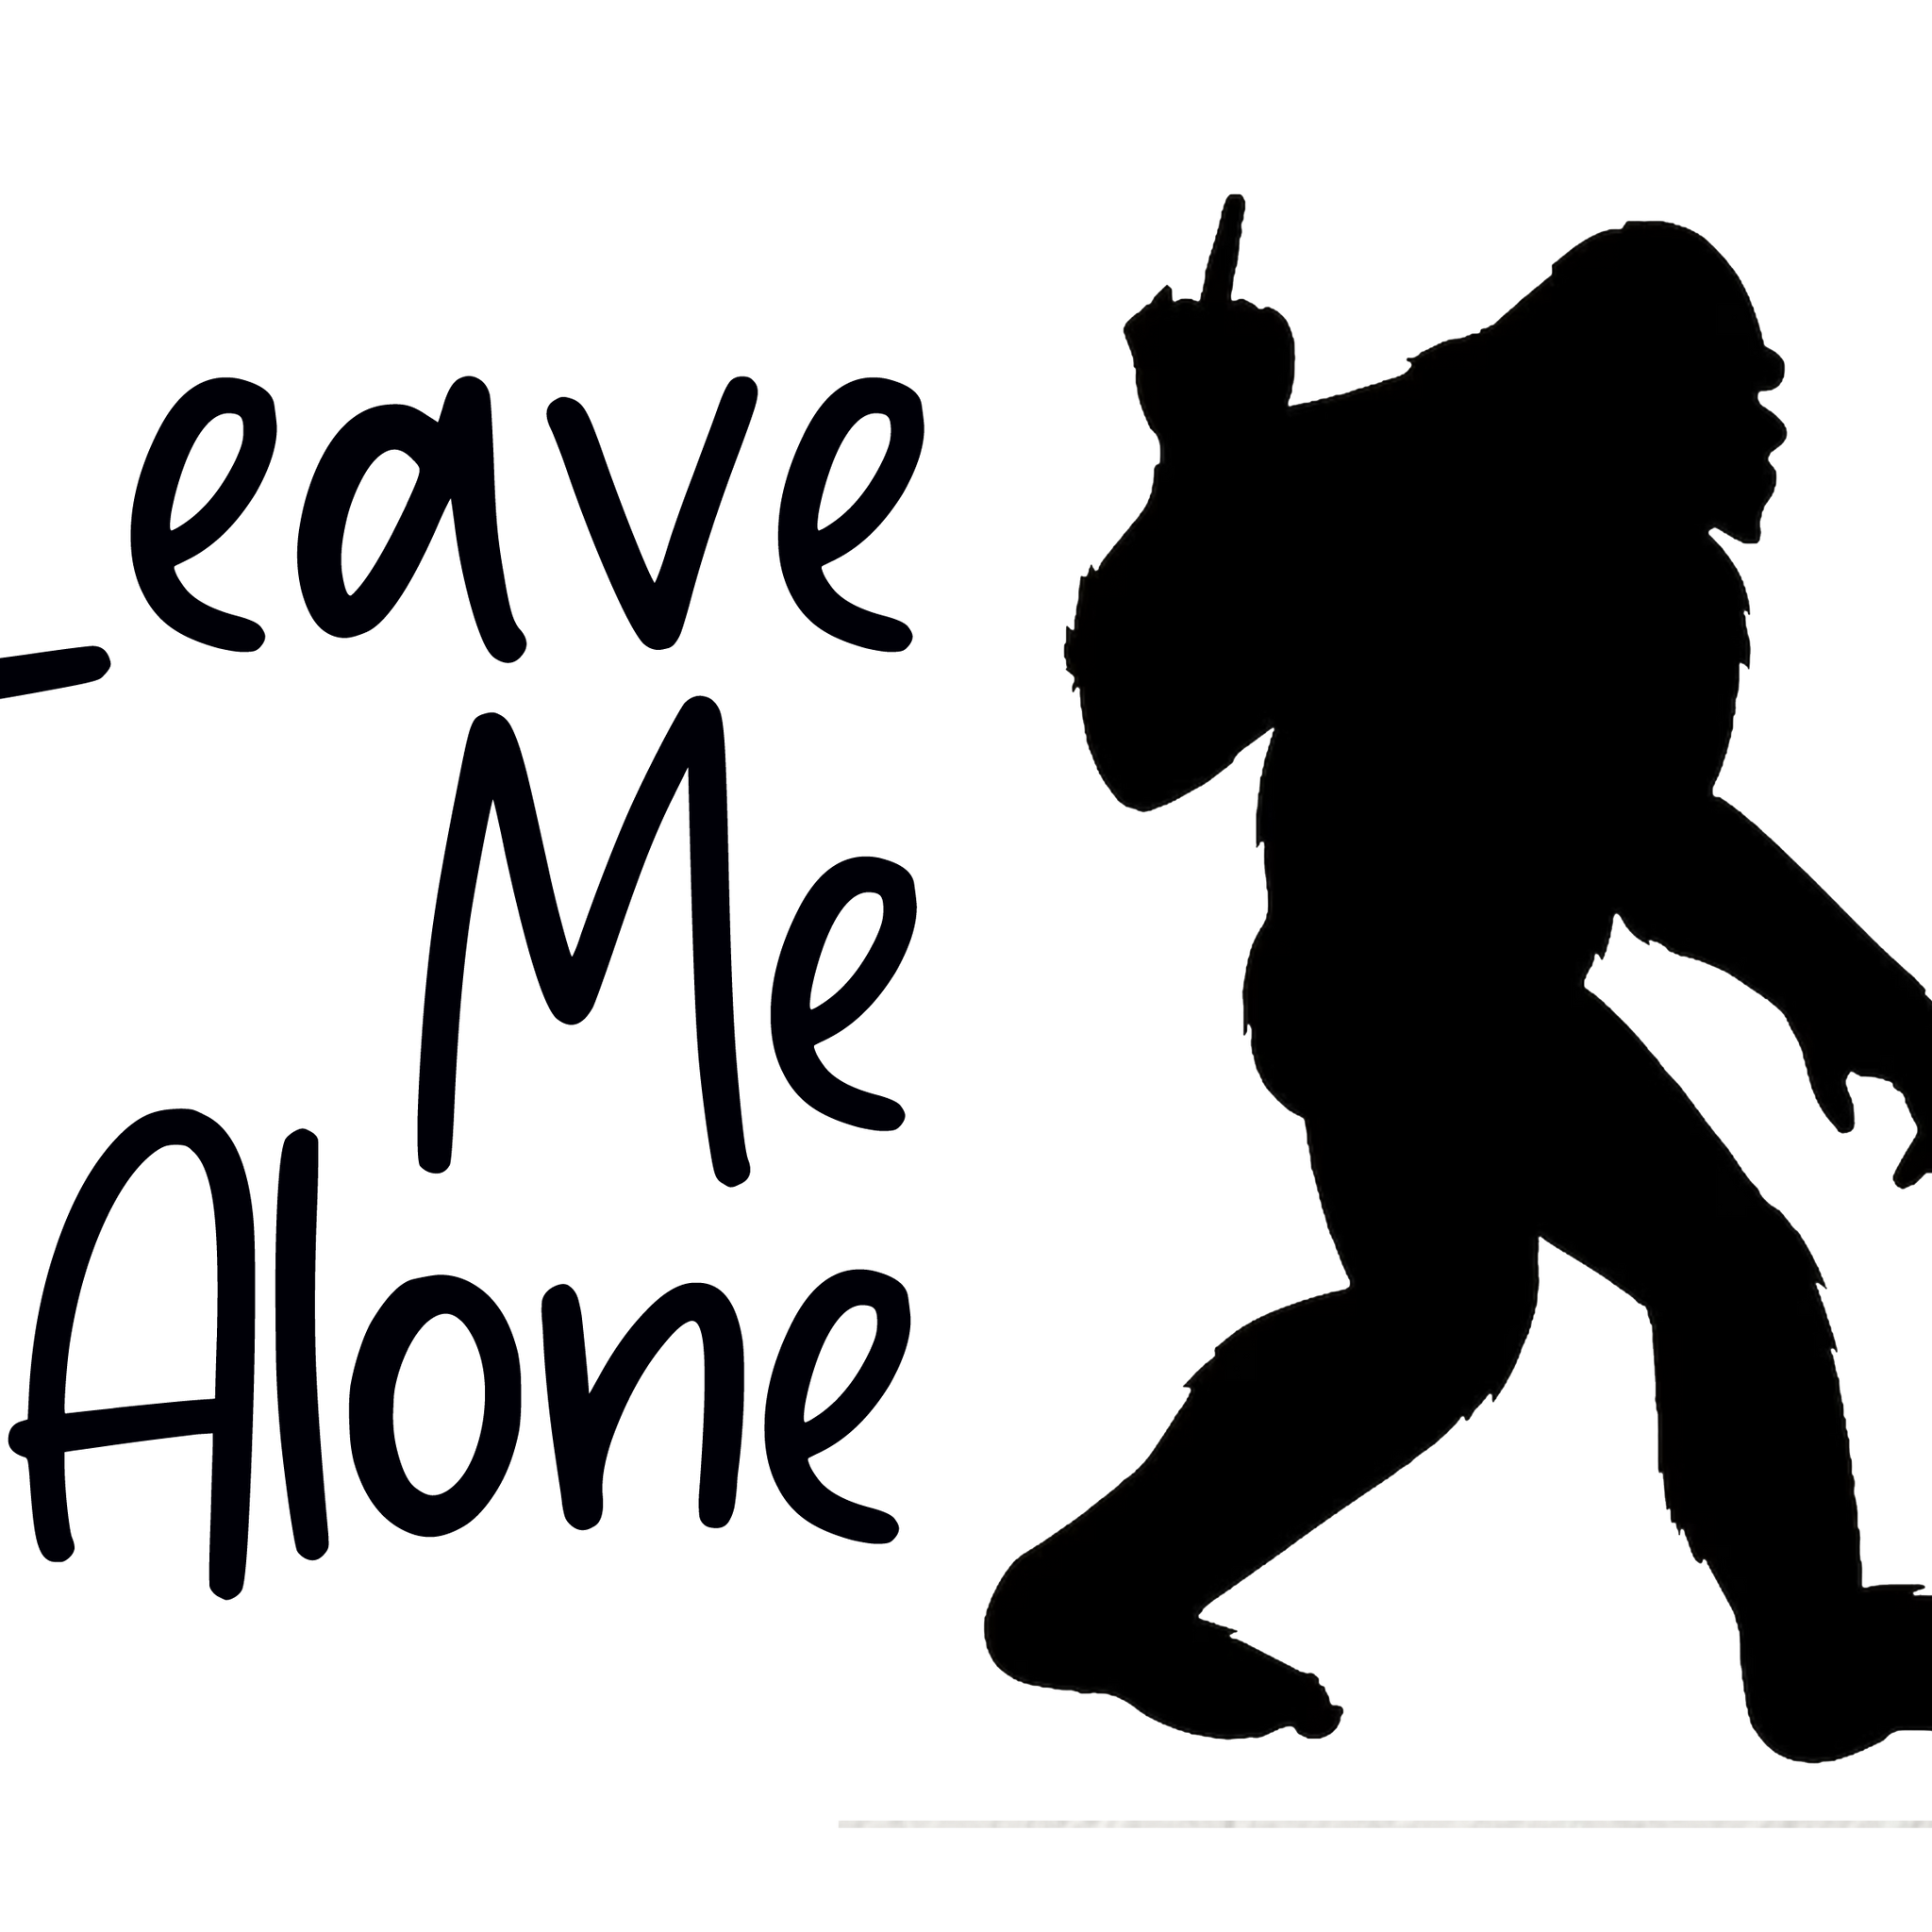 Image of the "Bigfoot - Leave Me Alone" Sticker, featuring a humorous design with Bigfoot and the message "Leave Me Alone," perfect for adding whimsy to any surface.